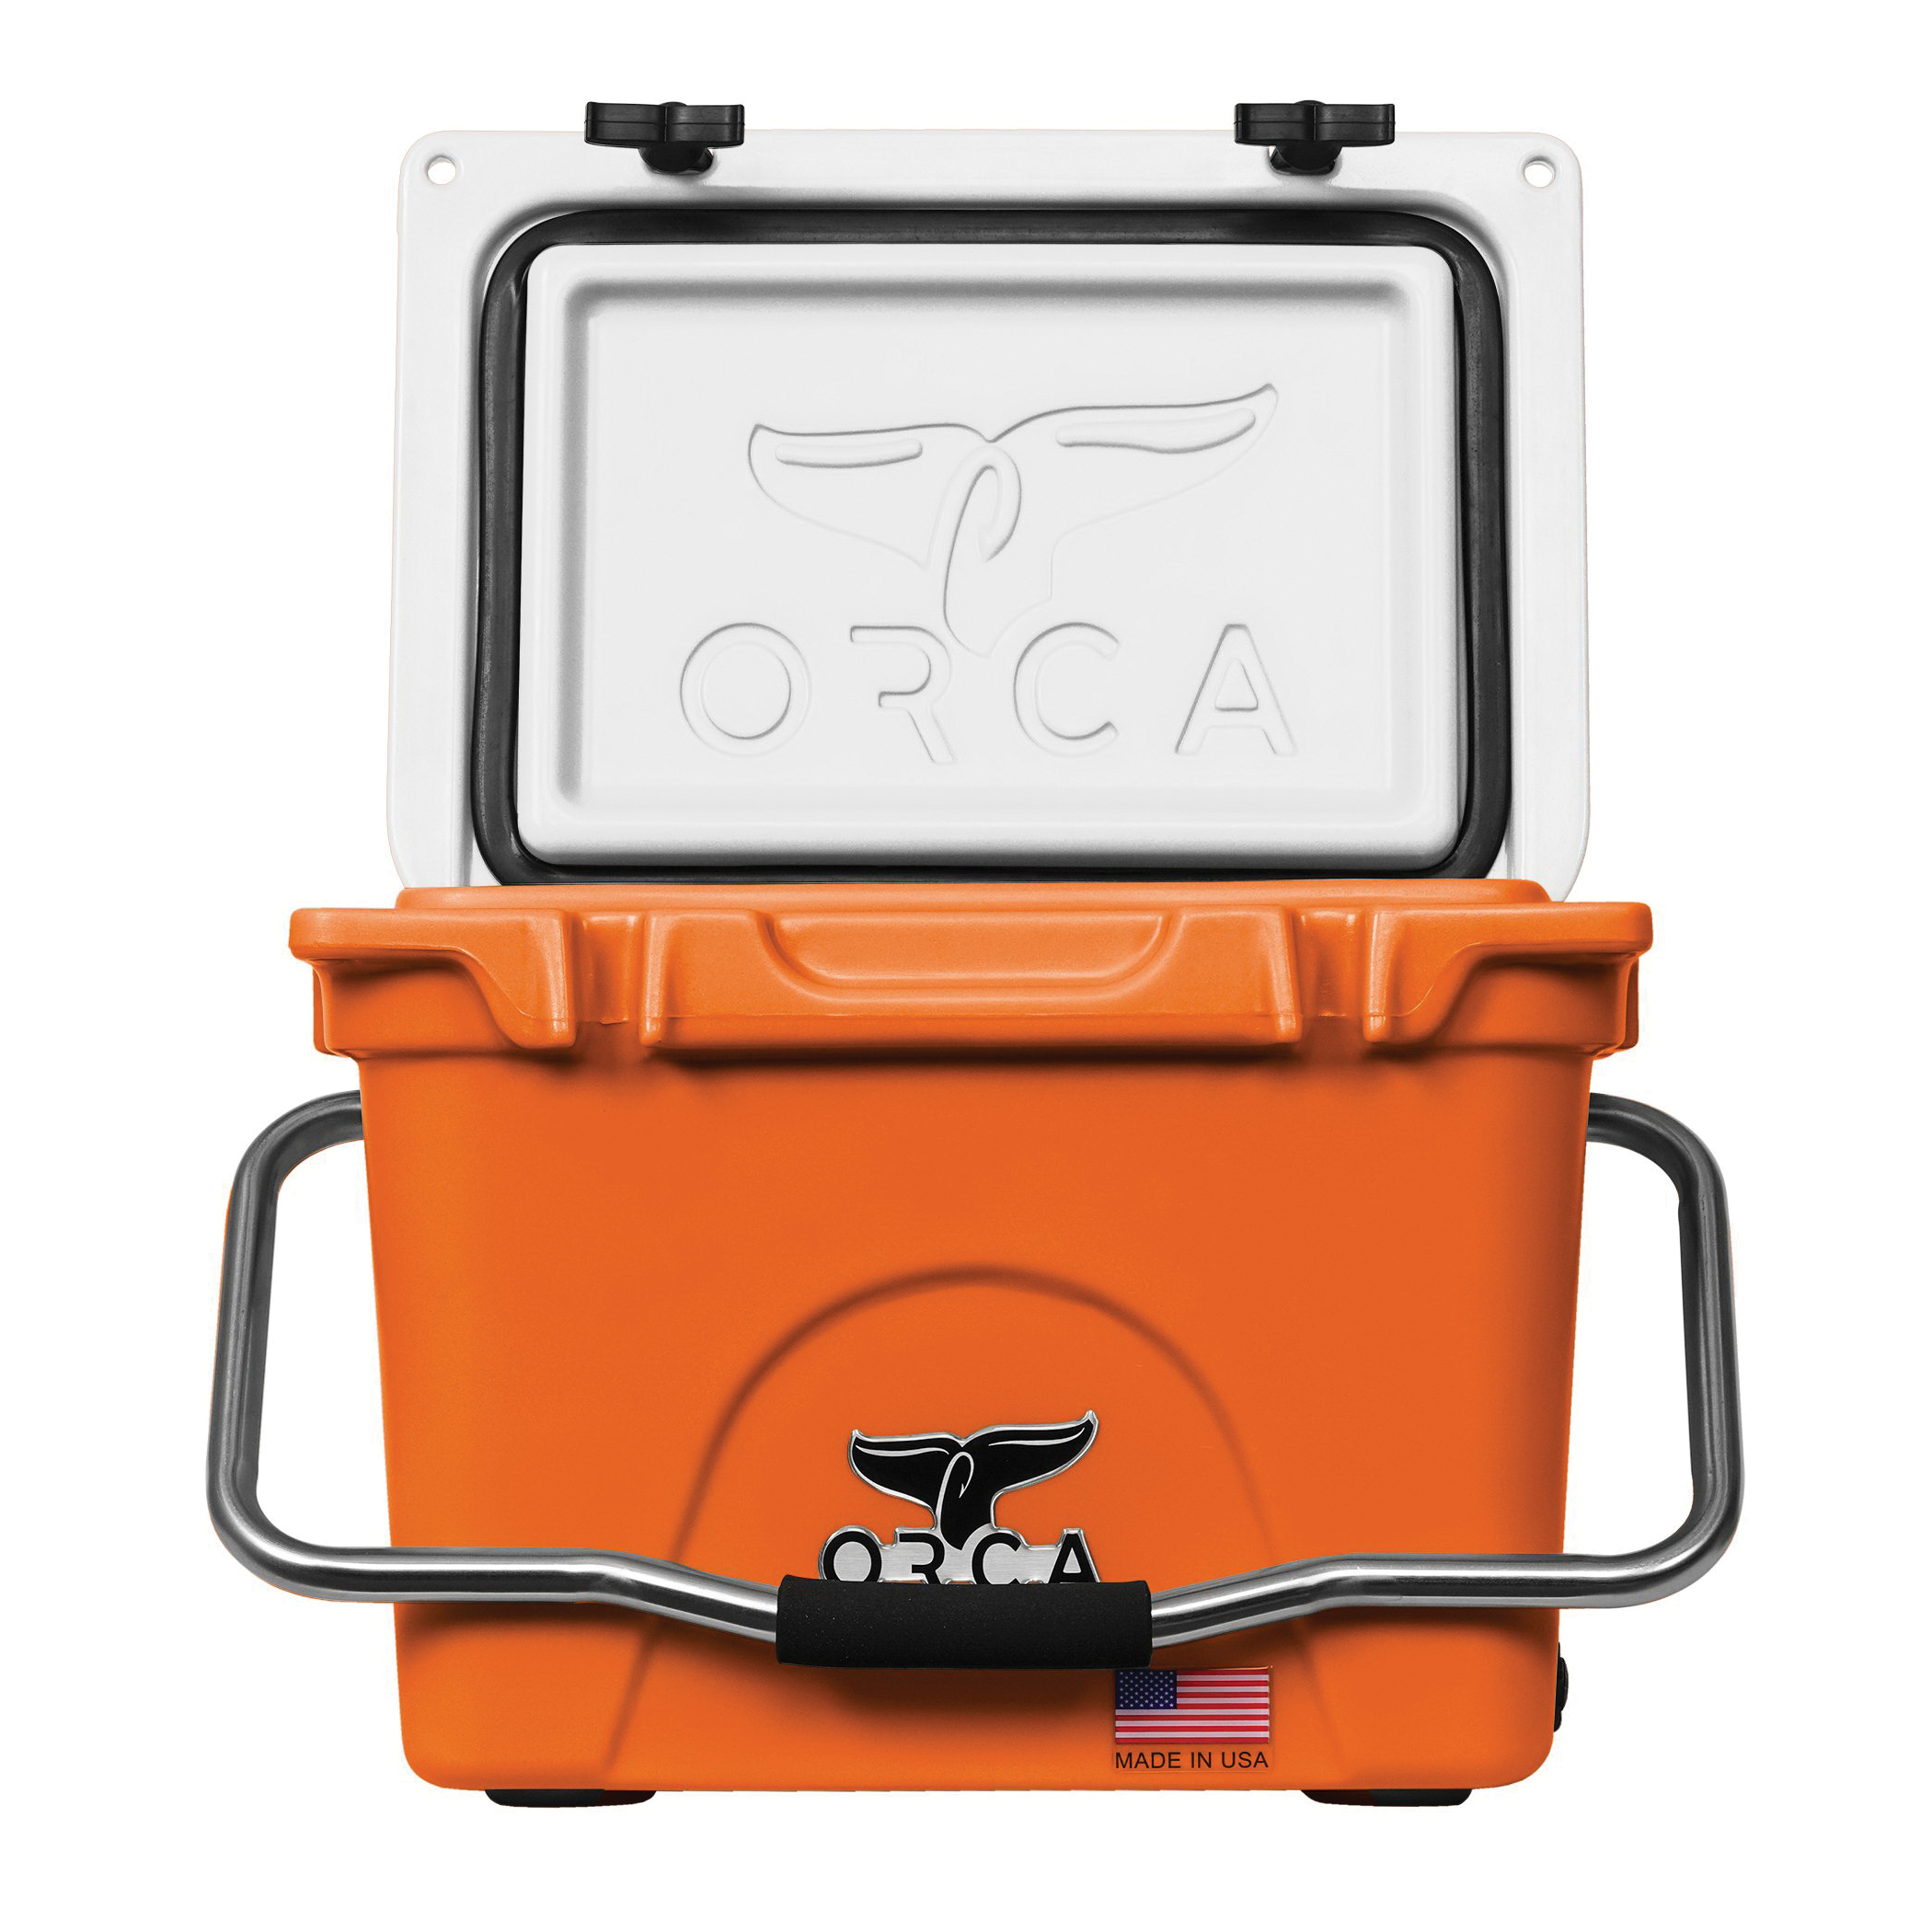 ORCA ORCBO/WH020 Cooler, 20 qt Capacity, Orange/White - 5